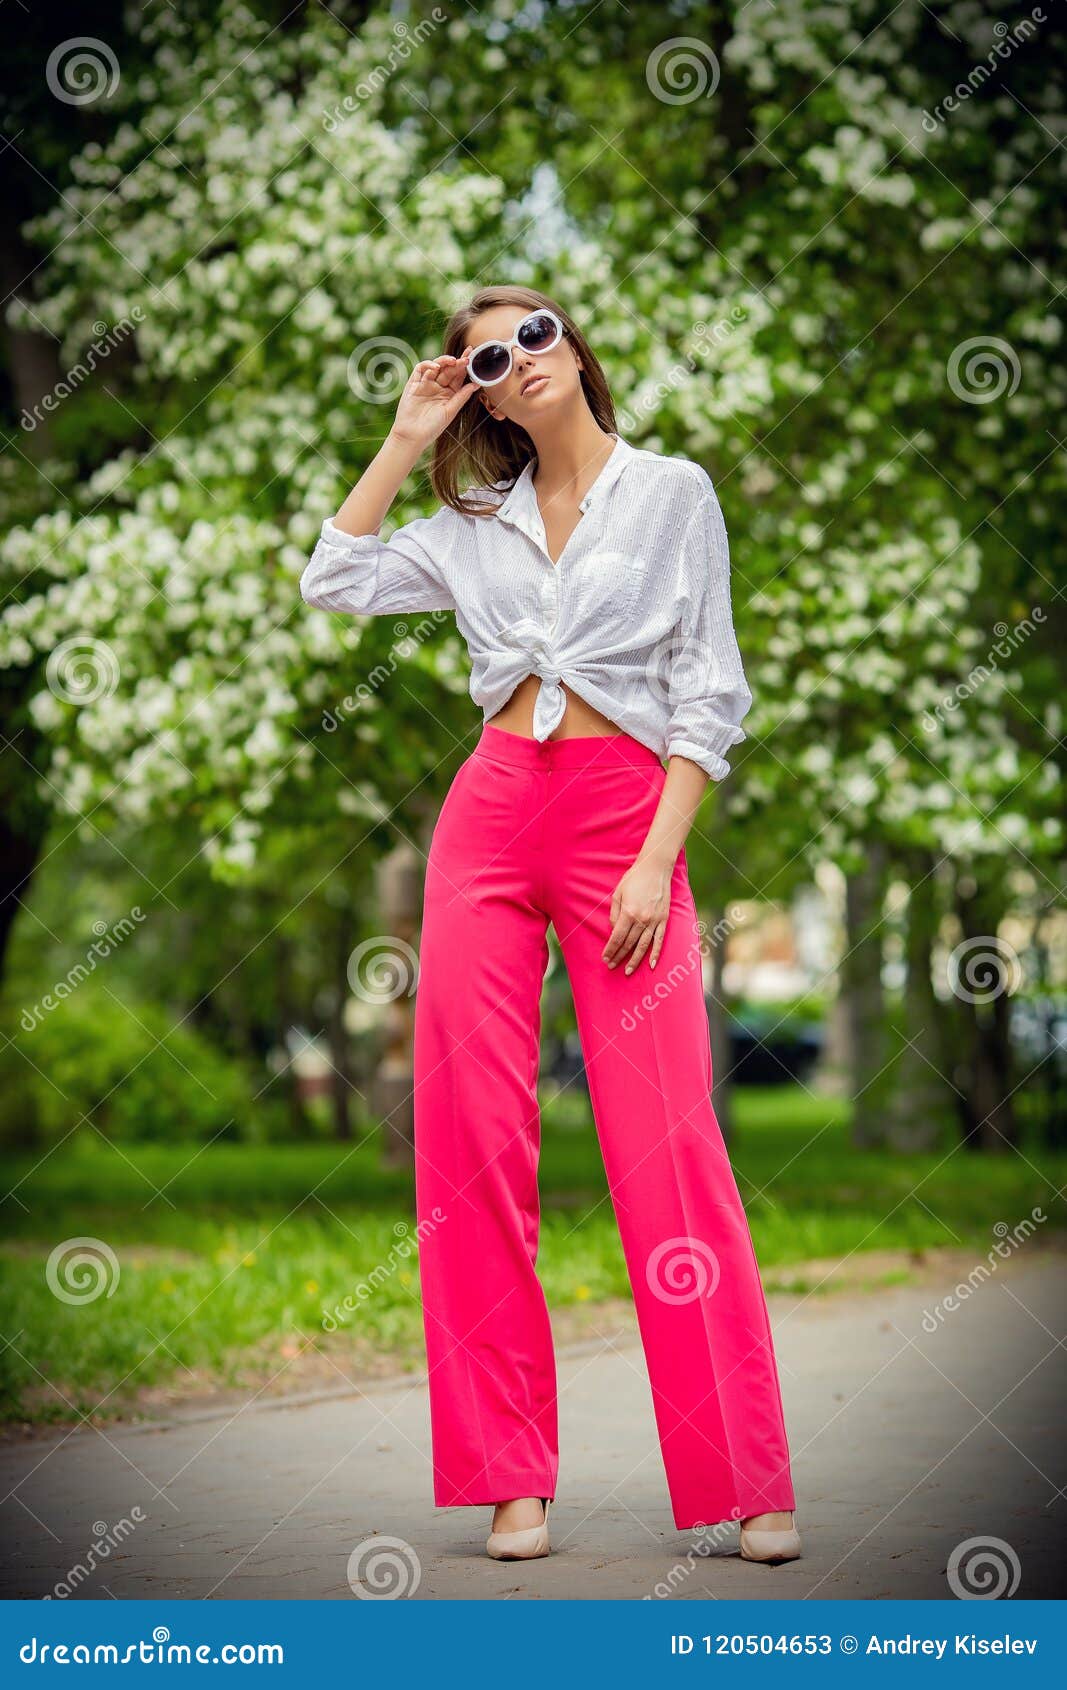 How To Wear Pink Pants for Women? › Renascent Photography